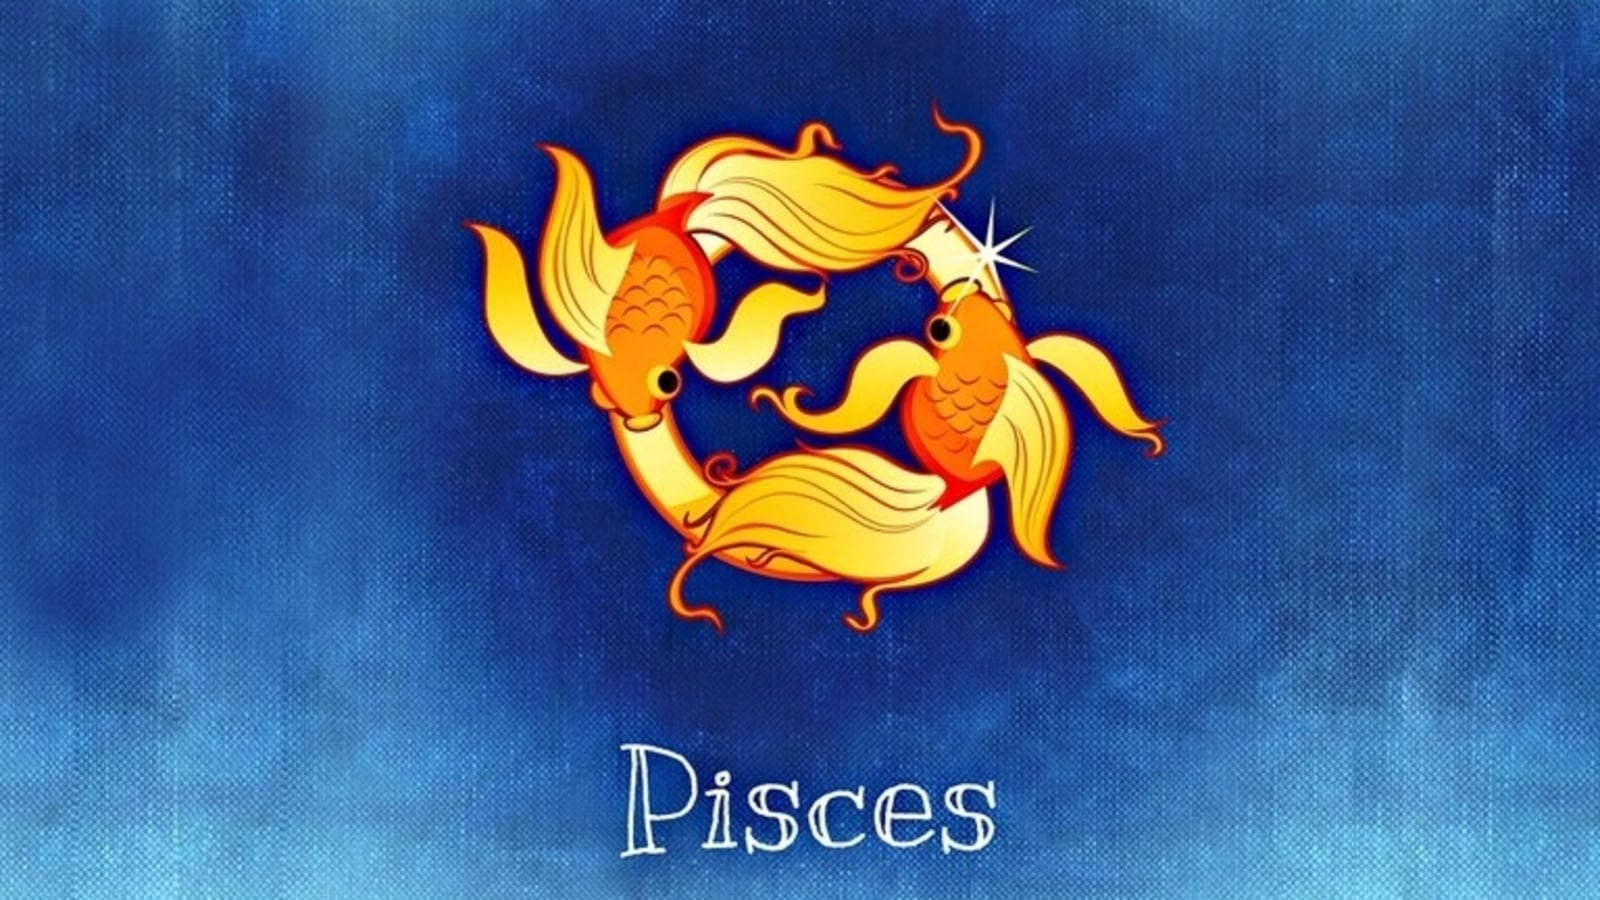 Pisces Daily Horoscope Astrological Prediction for August 25